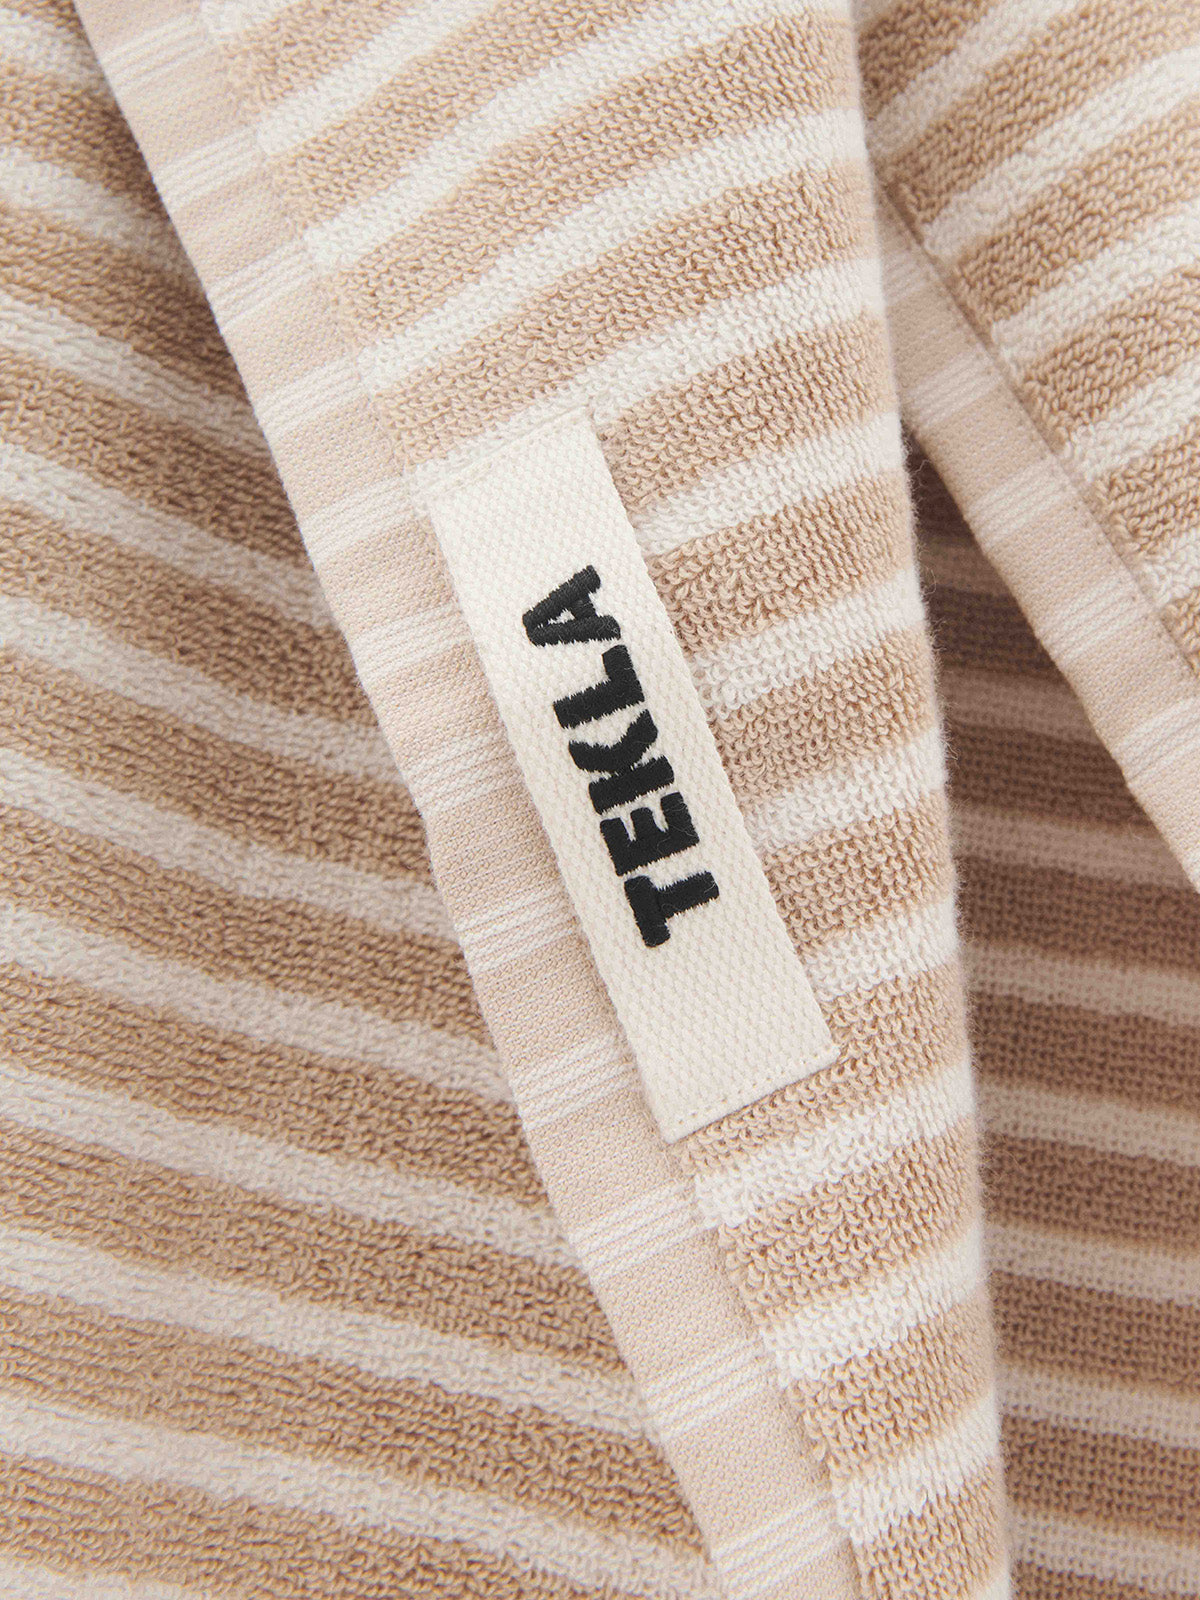 Hand Towel in Ivory Stripes